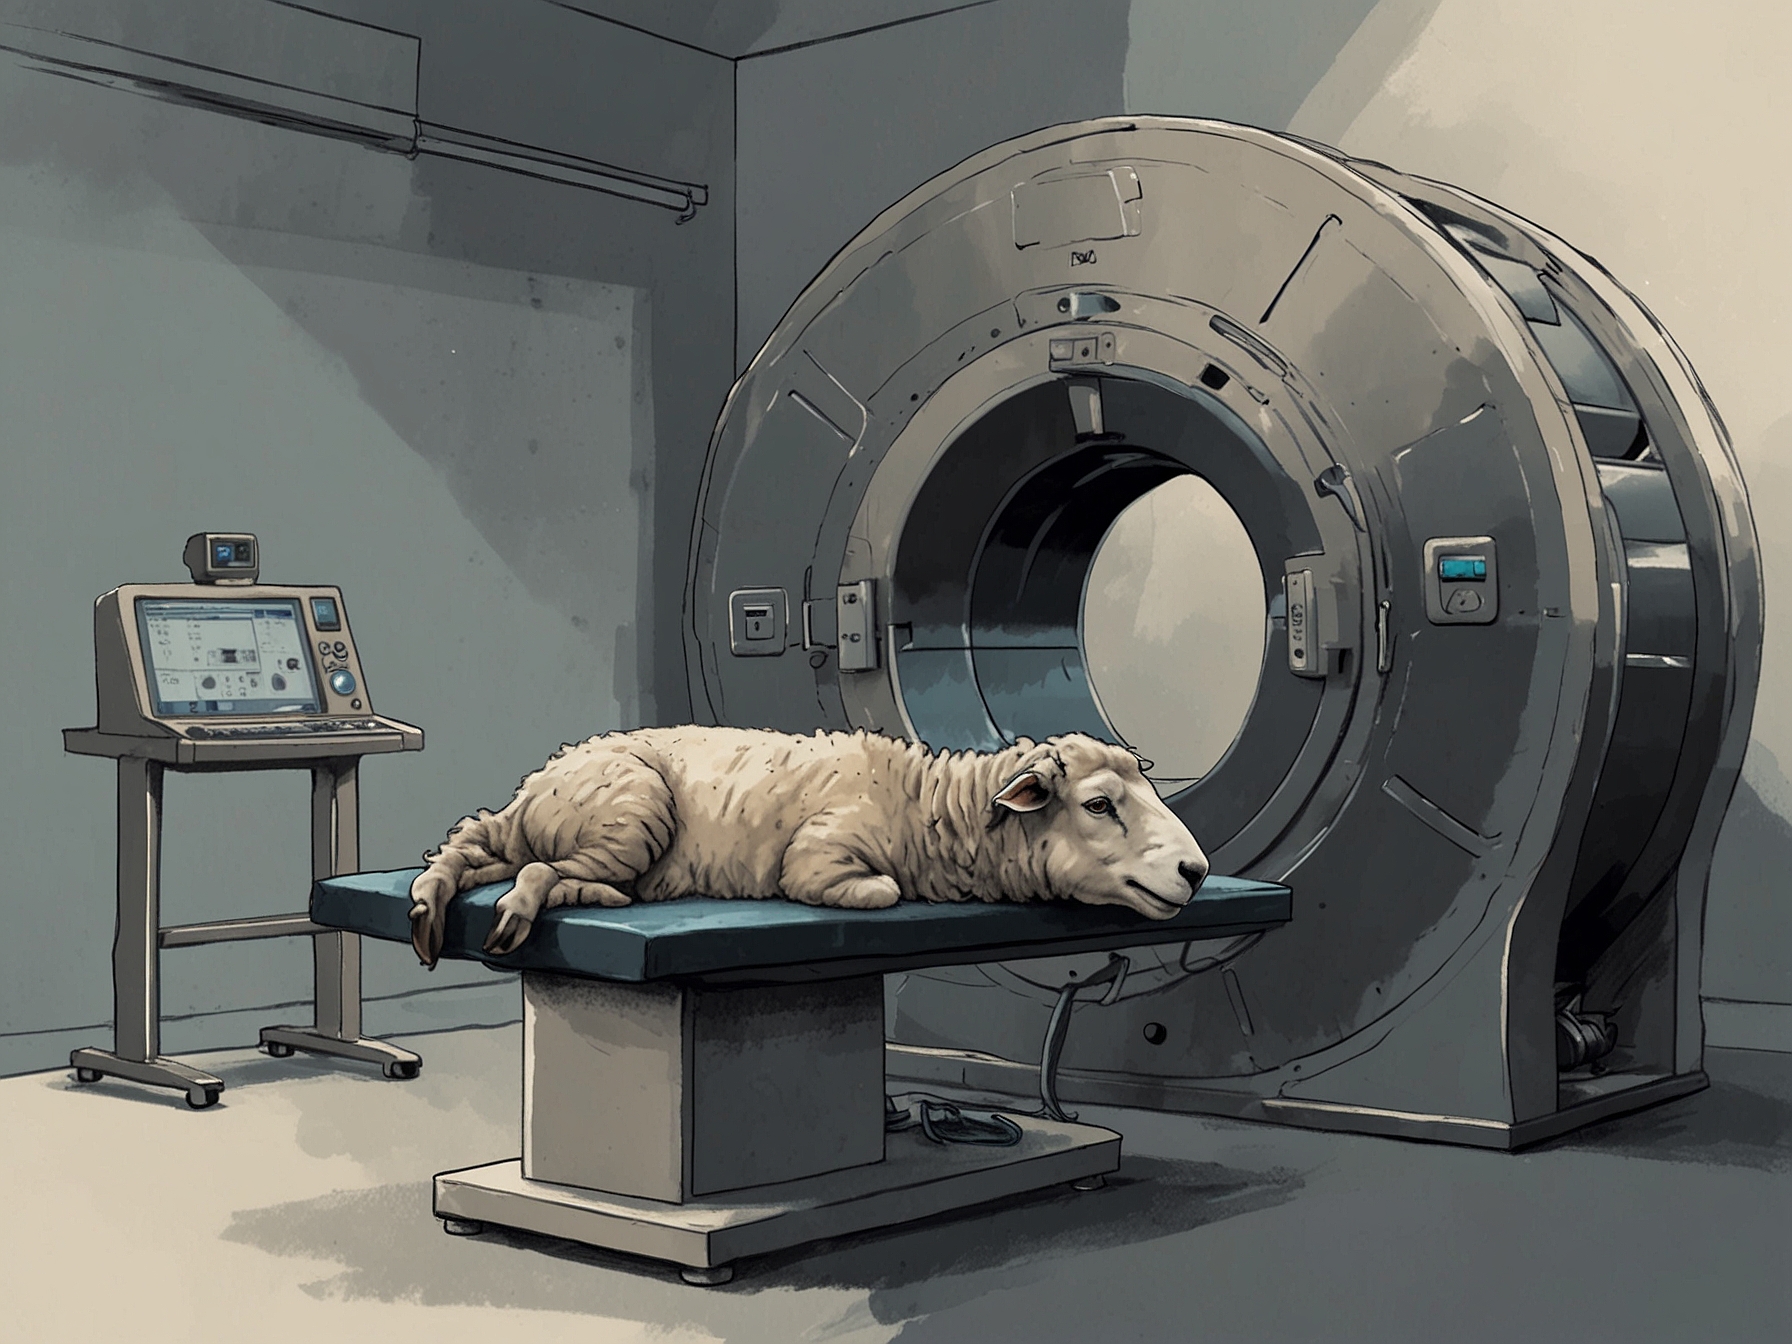 Image illustrating a sheep calmly lying in an MRI machine, depicting the successful training process to remain still and cooperative without the need for anesthesia.